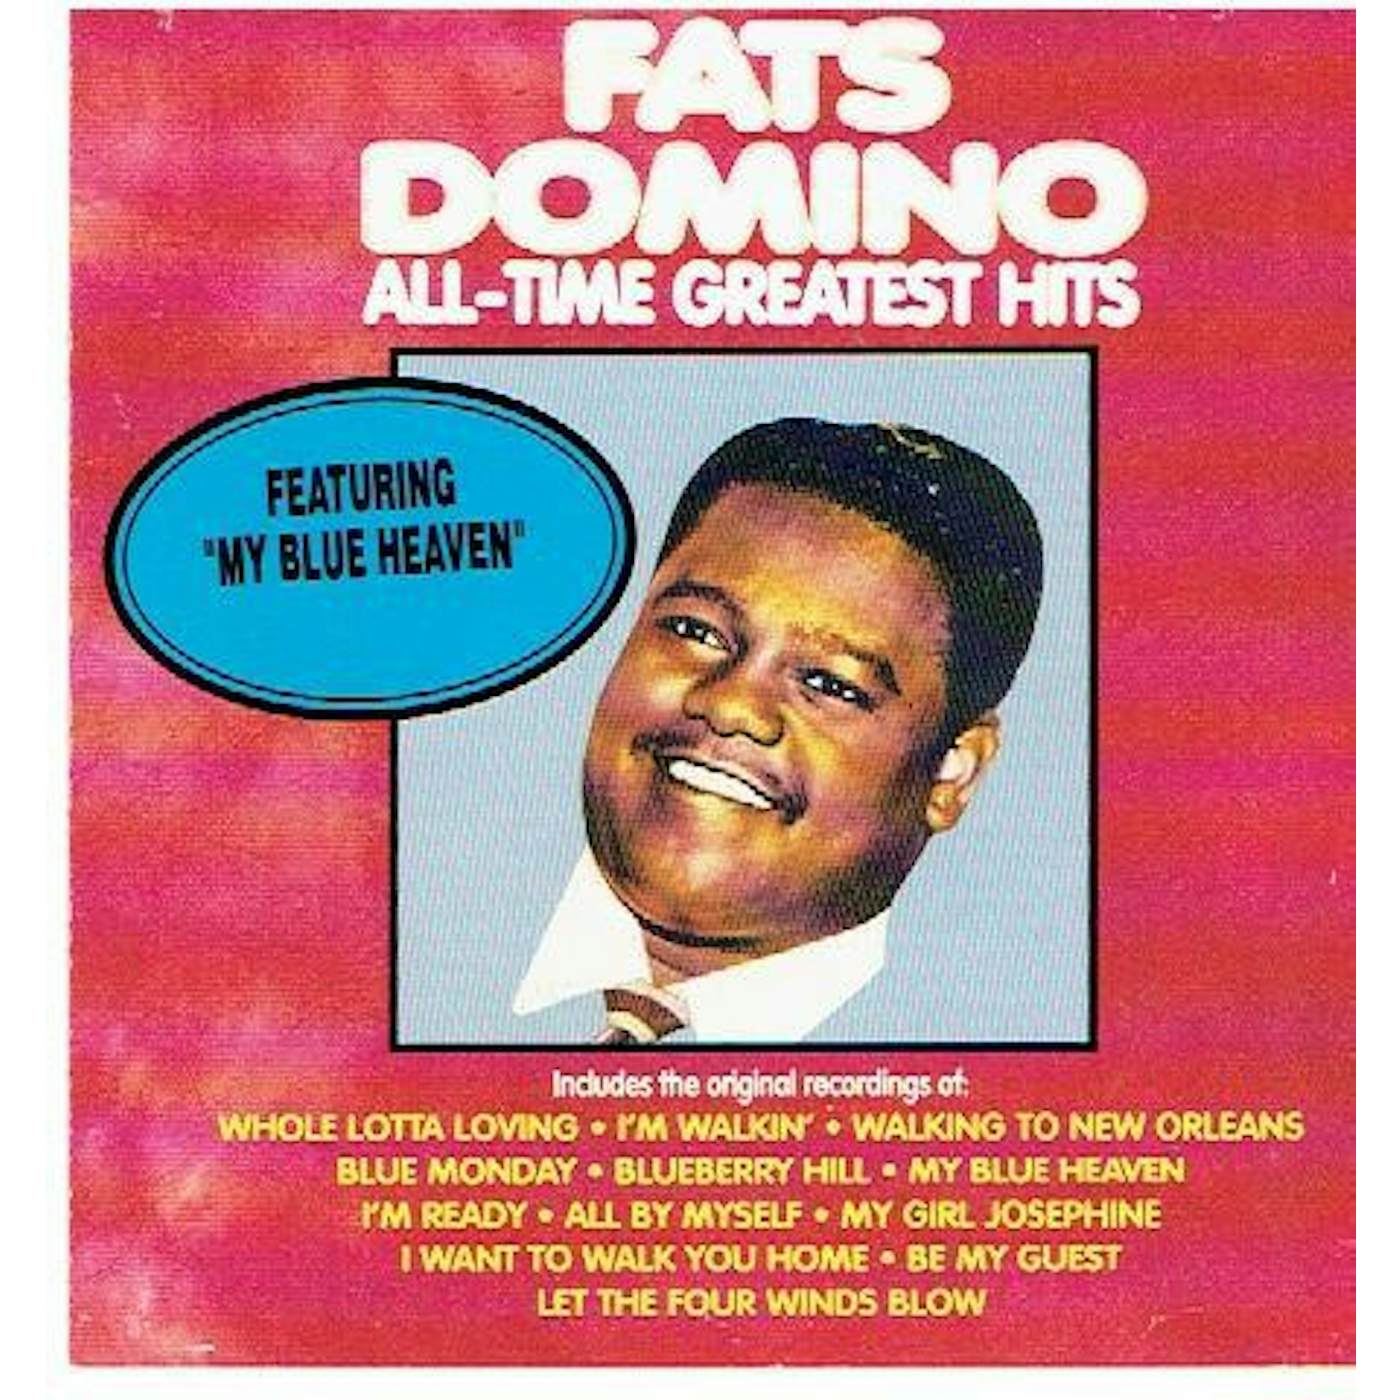 Fats Domino ALL-TIME GREATEST HITS Vinyl Record